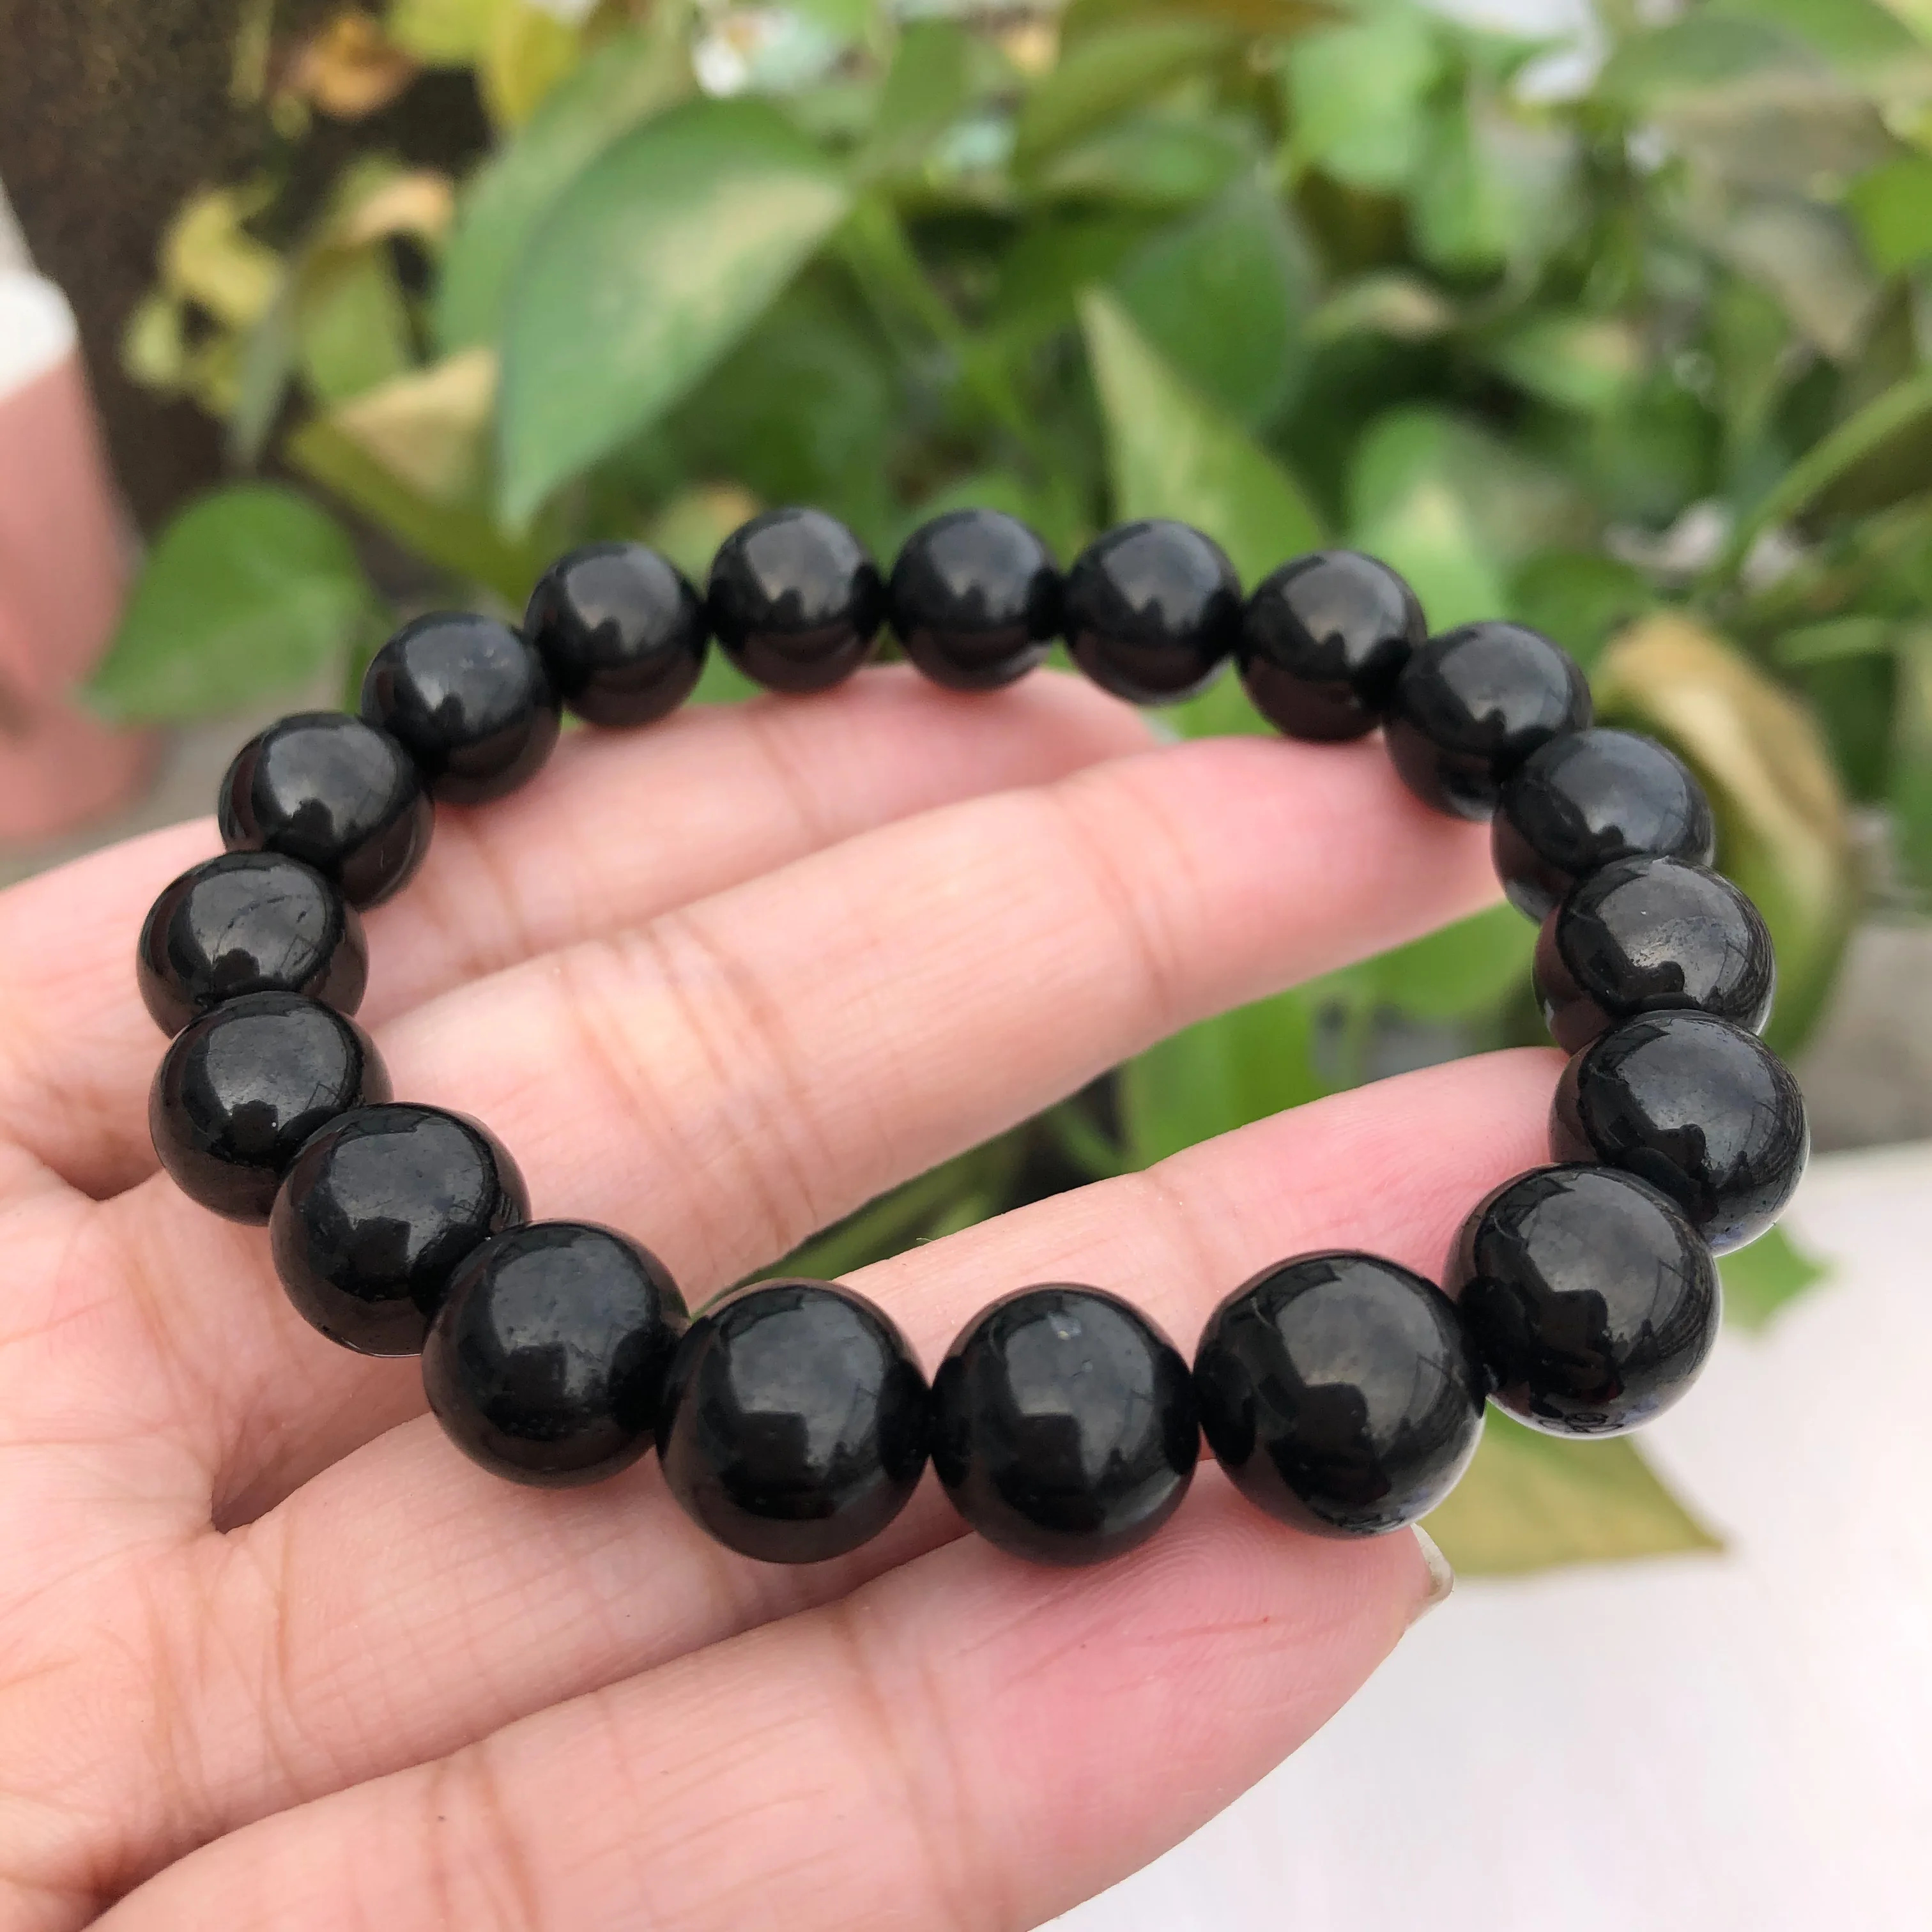 Details about   Healing Natural Jet Stone with Golden Pyrite Gems Beads Bracelet Jewelry for Men 